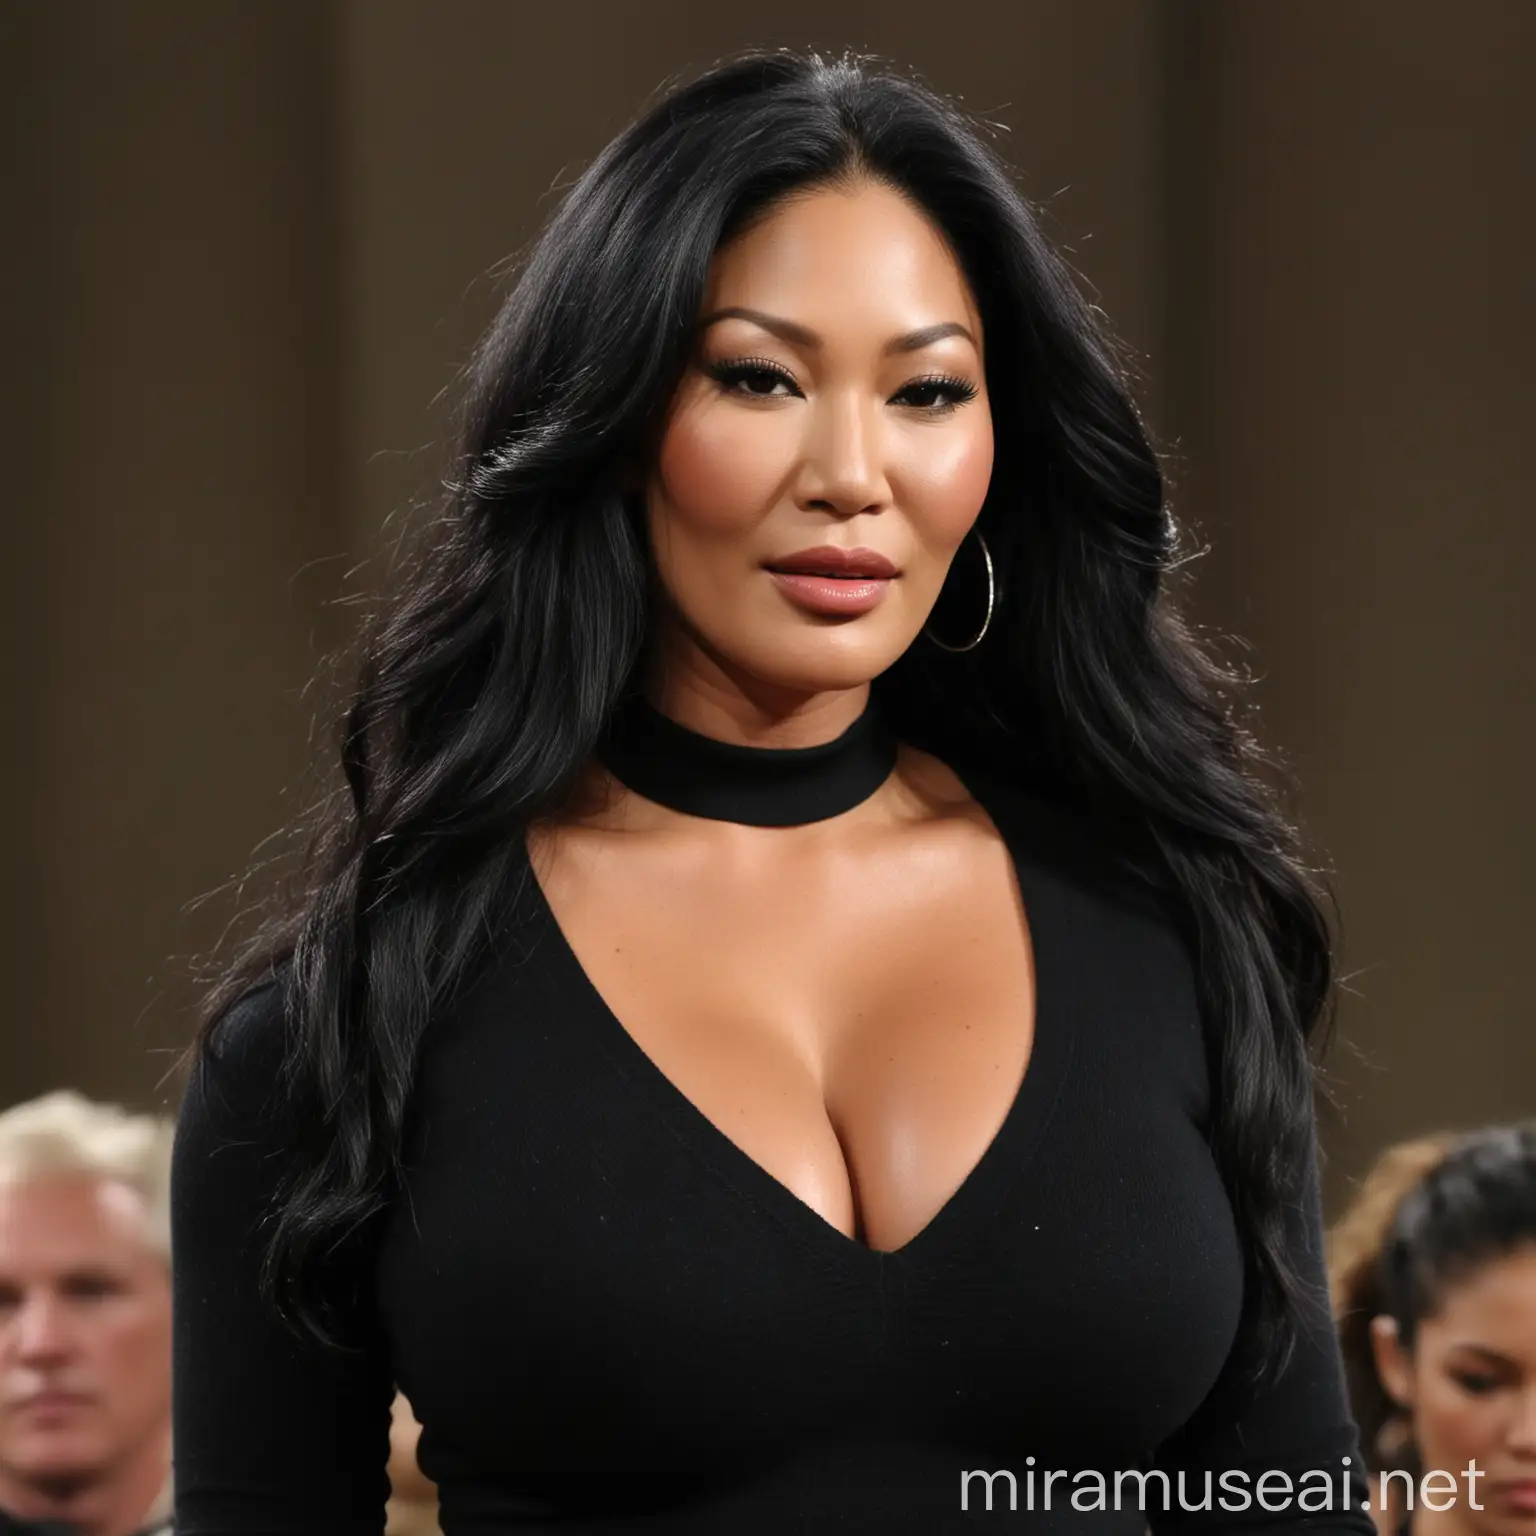 Kimora Lee Simmons wearing a tight black sweater in church, bbw, giant breasts, showing massive cleavage, zoomed in from the waist up